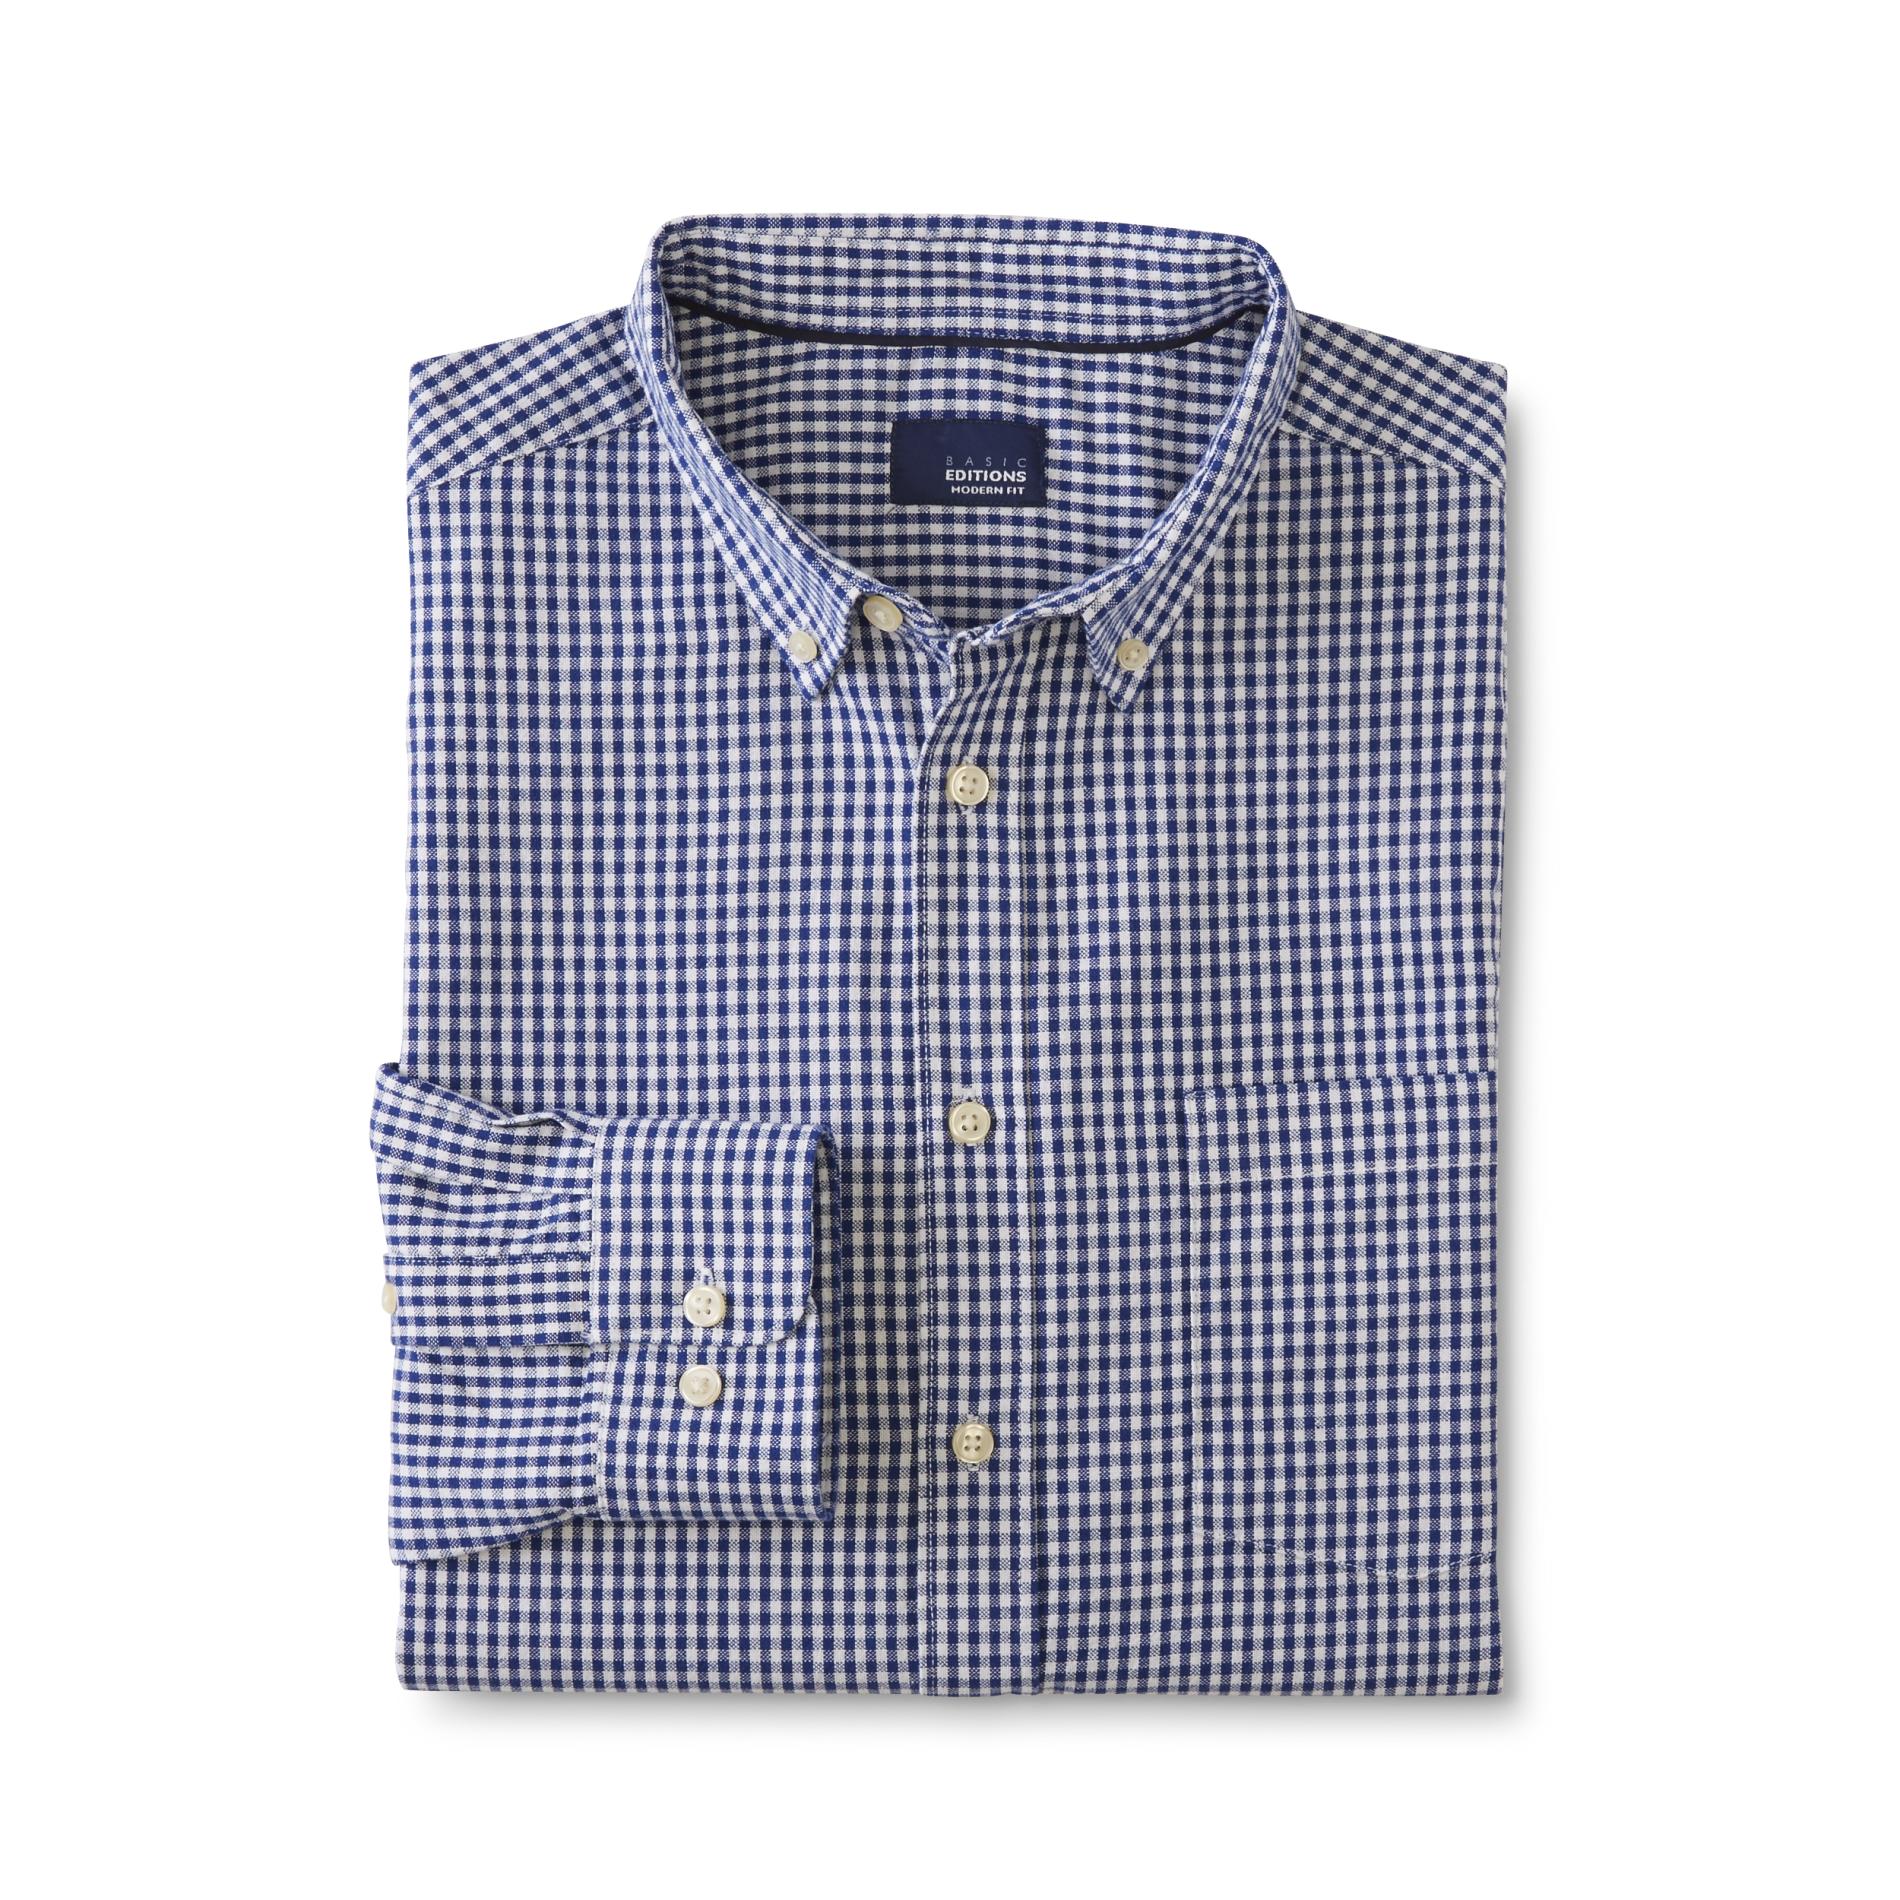 Basic Editions Men's Button-Front Oxford Shirt - Gingham